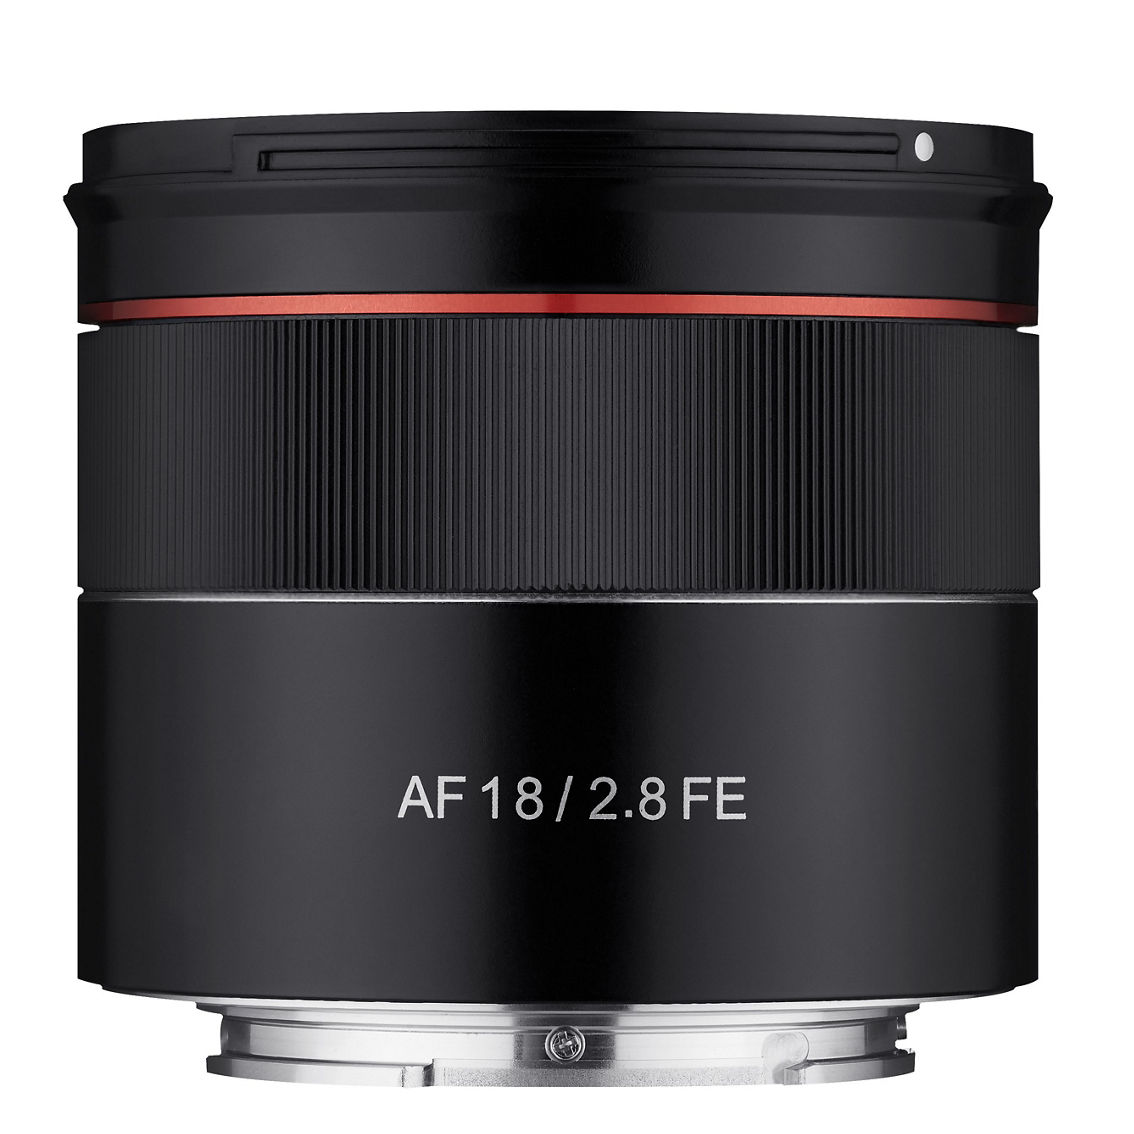 Rokinon 18mm F2.8 AF Wide Angle Full Frame Lens for Sony E Mount - Image 2 of 5